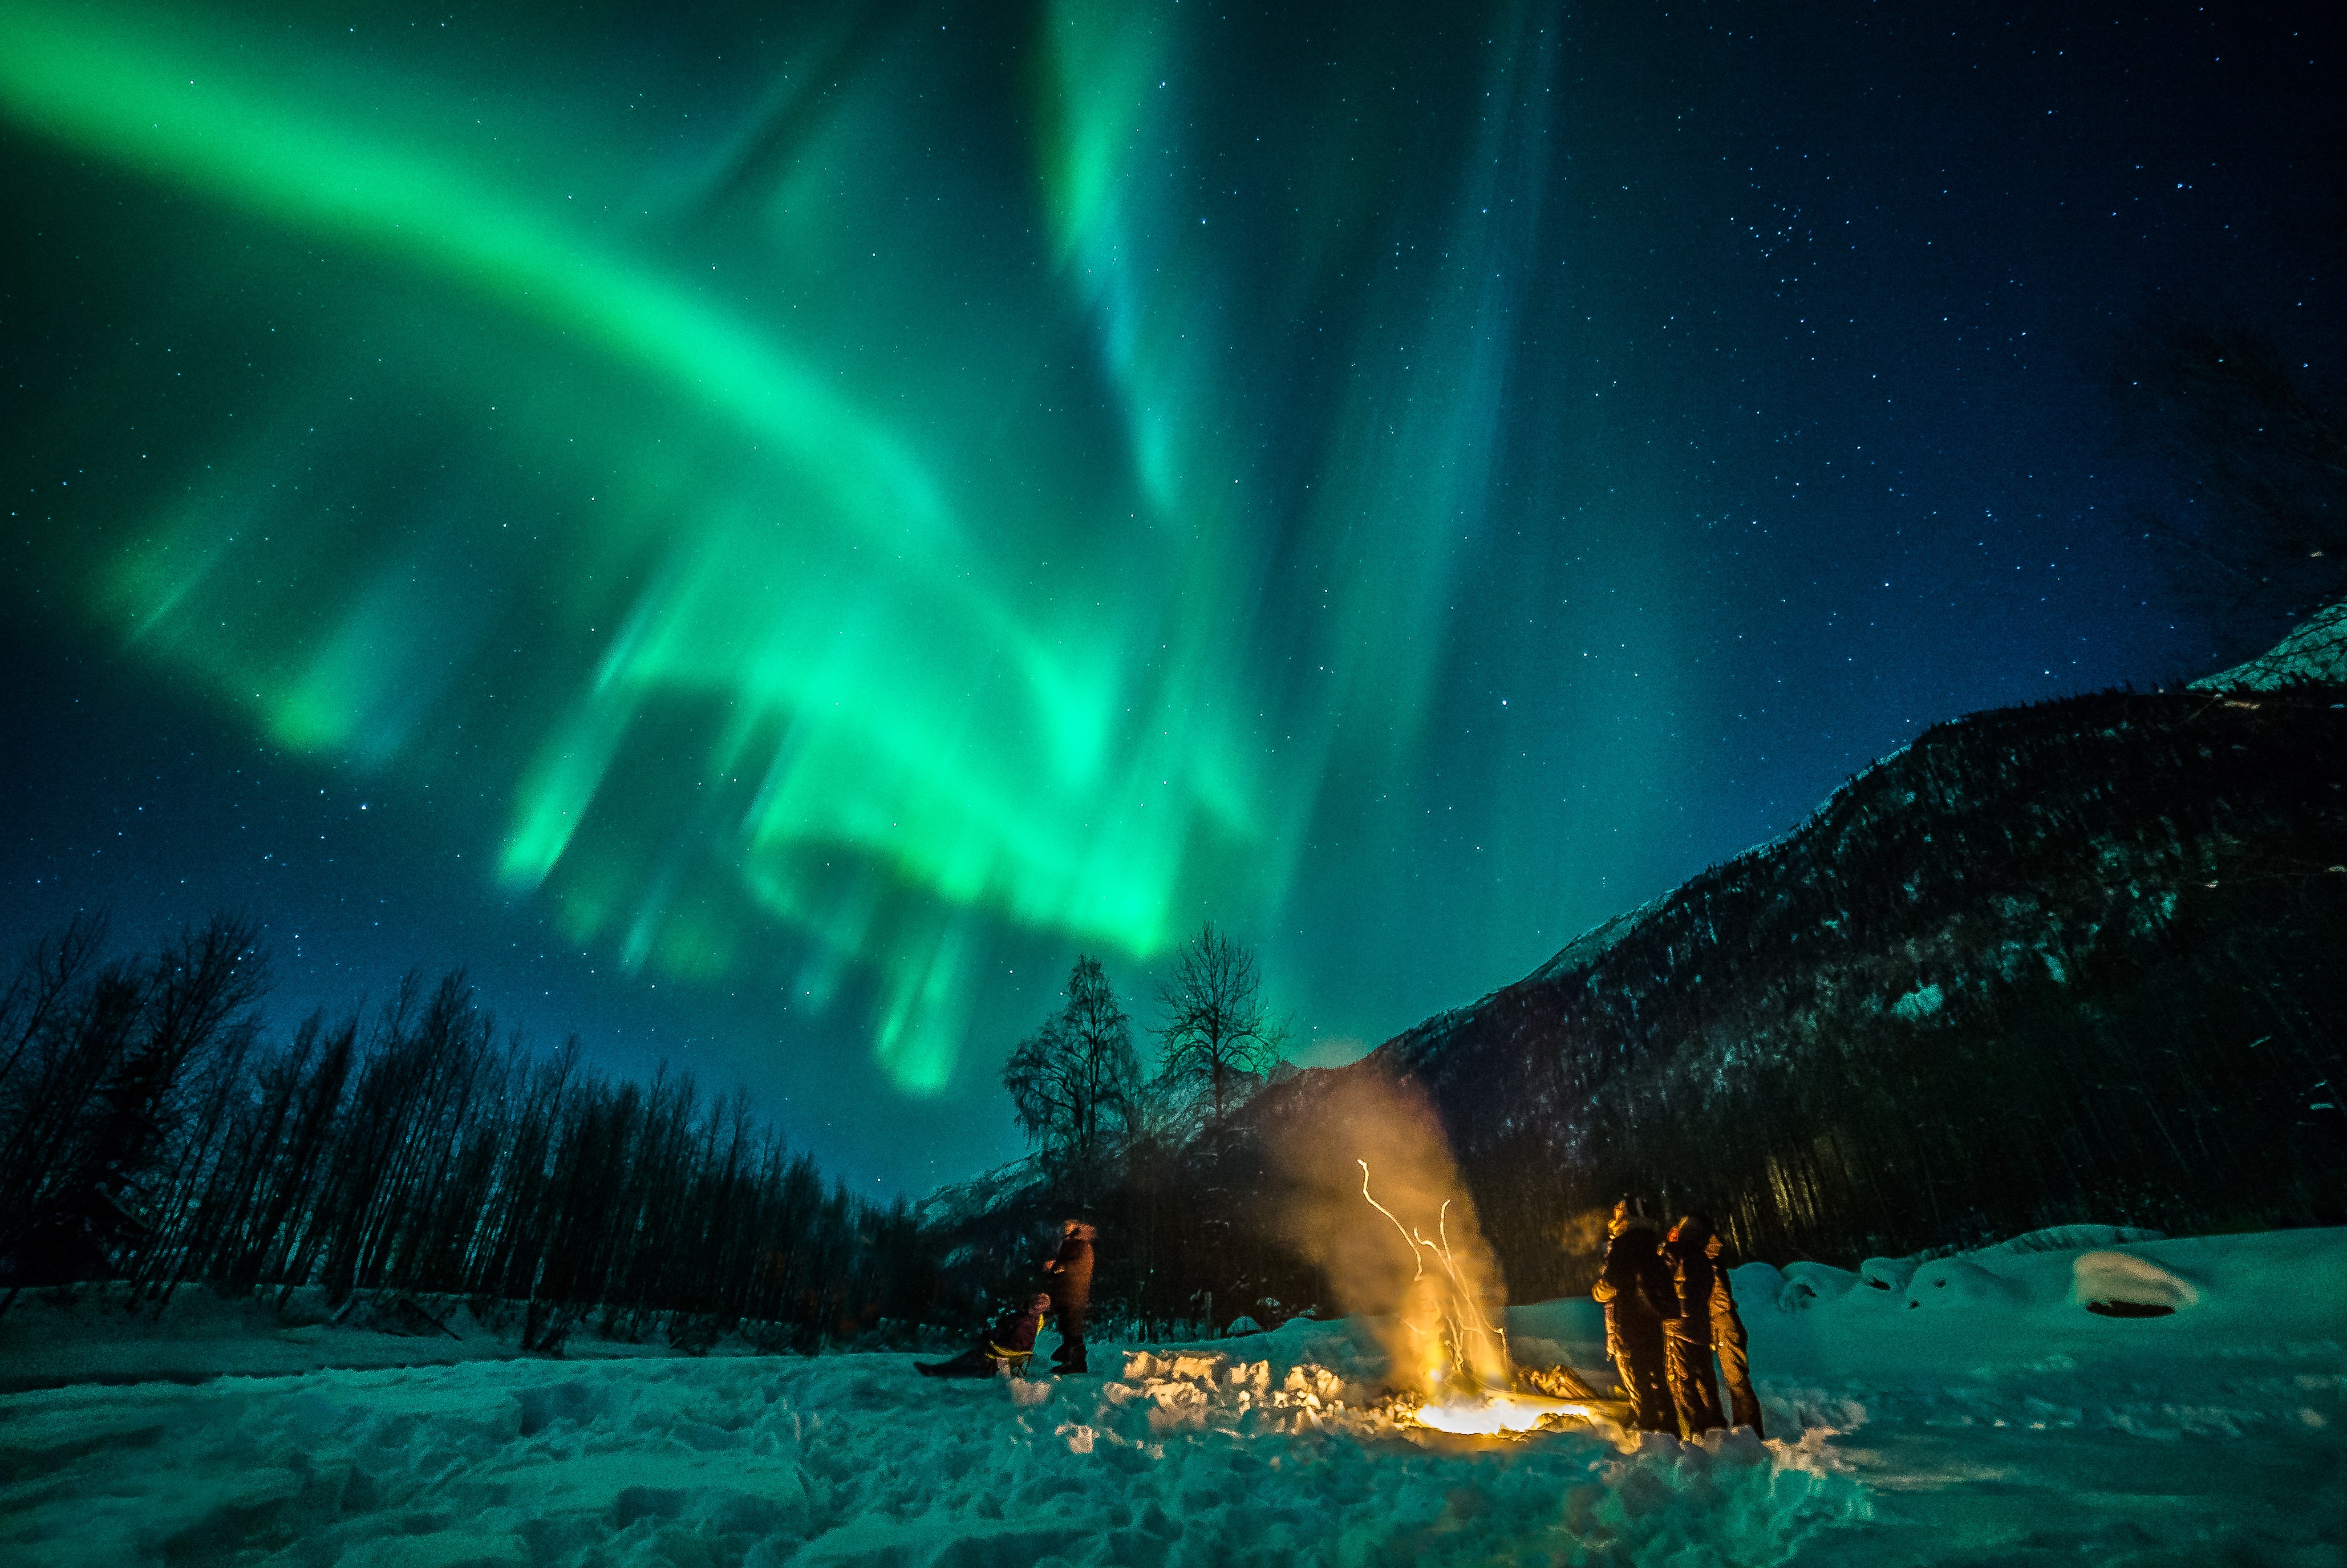 The best time to travel to Alaska: people around a fire watching the Northern Lights in the sky.